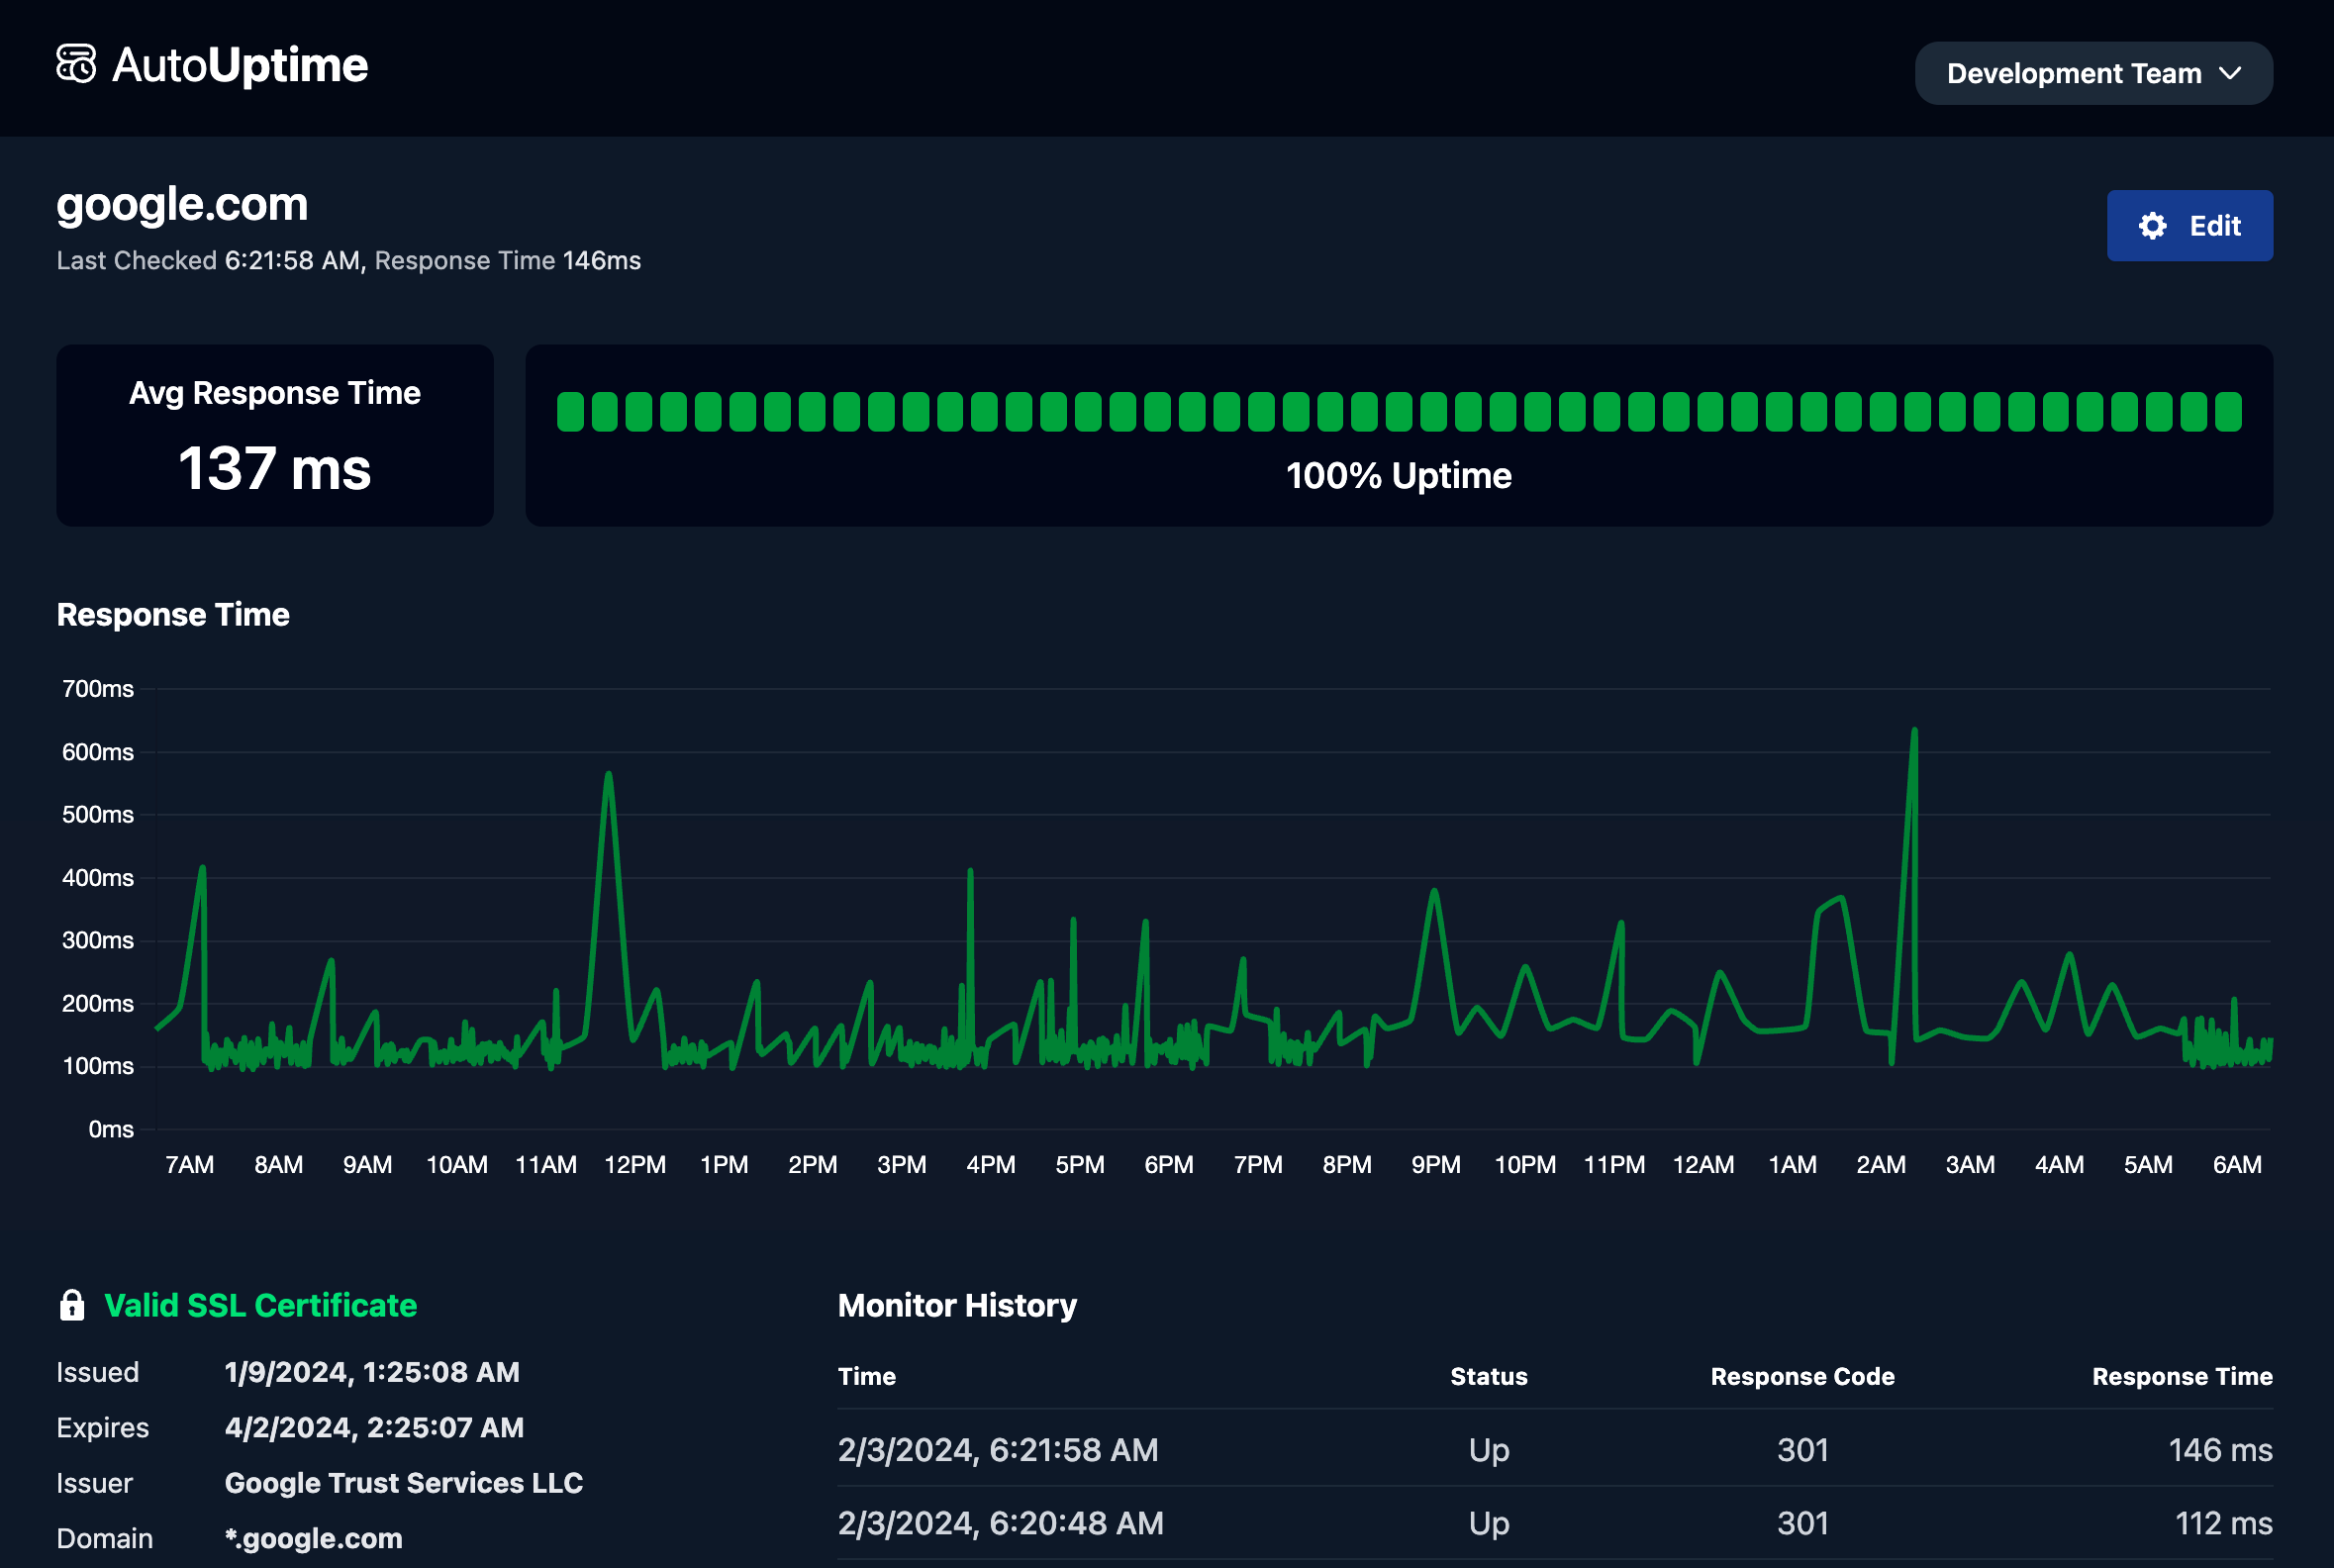 AutoUptime's outage monitoring dashboard